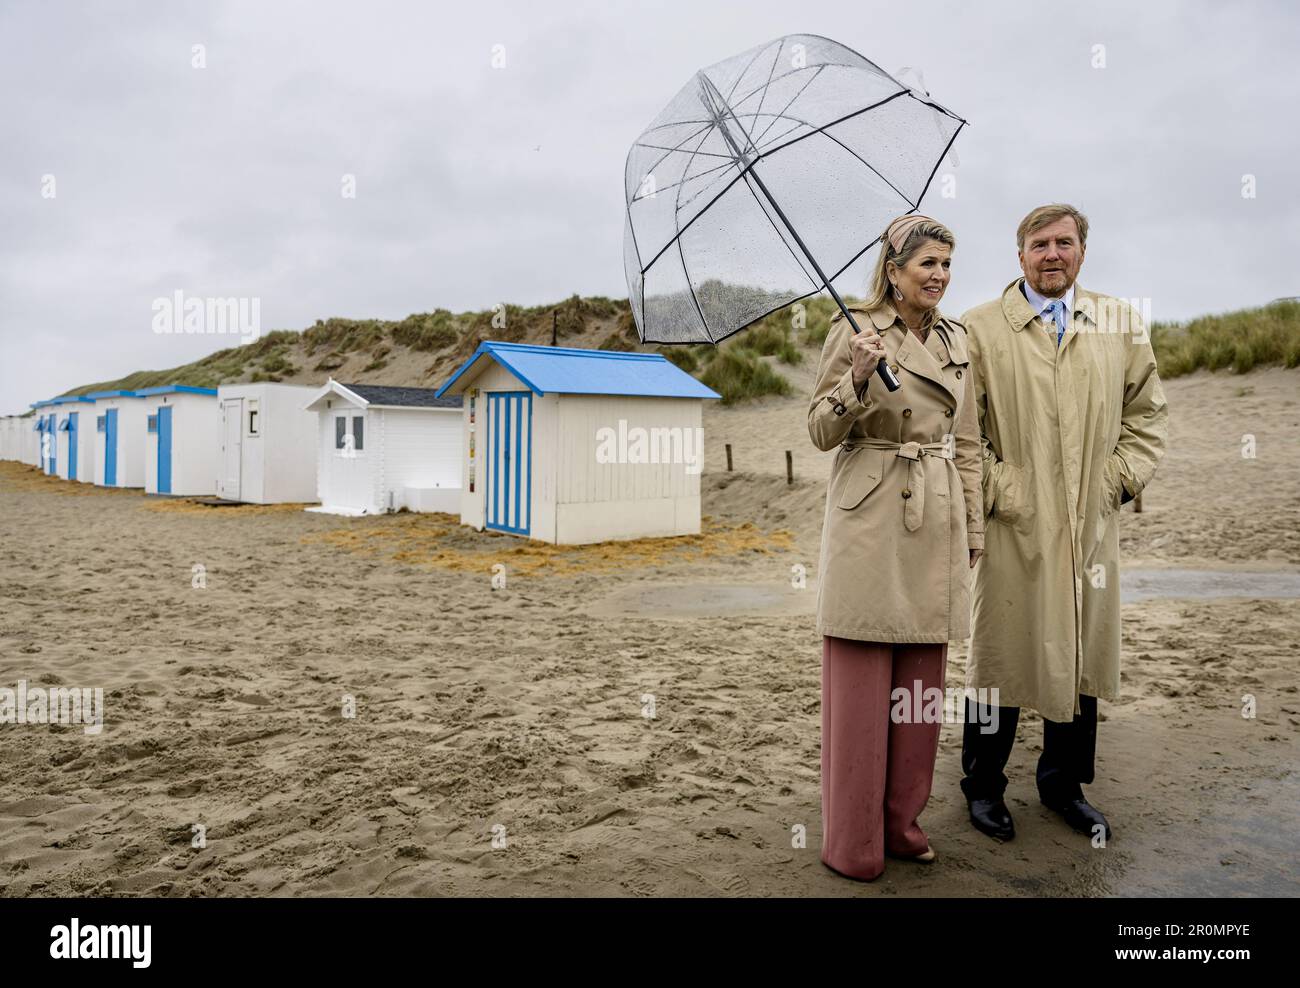 DEN HOORN - King Willem-Alexander and Queen Maxima pose at Beach Pavilion Paal 9. The royal couple is paying a two-day regional visit to the Wadden Islands. ANP SEM VAN DER WAL netherlands out - belgium out Credit: ANP/Alamy Live News Stock Photo